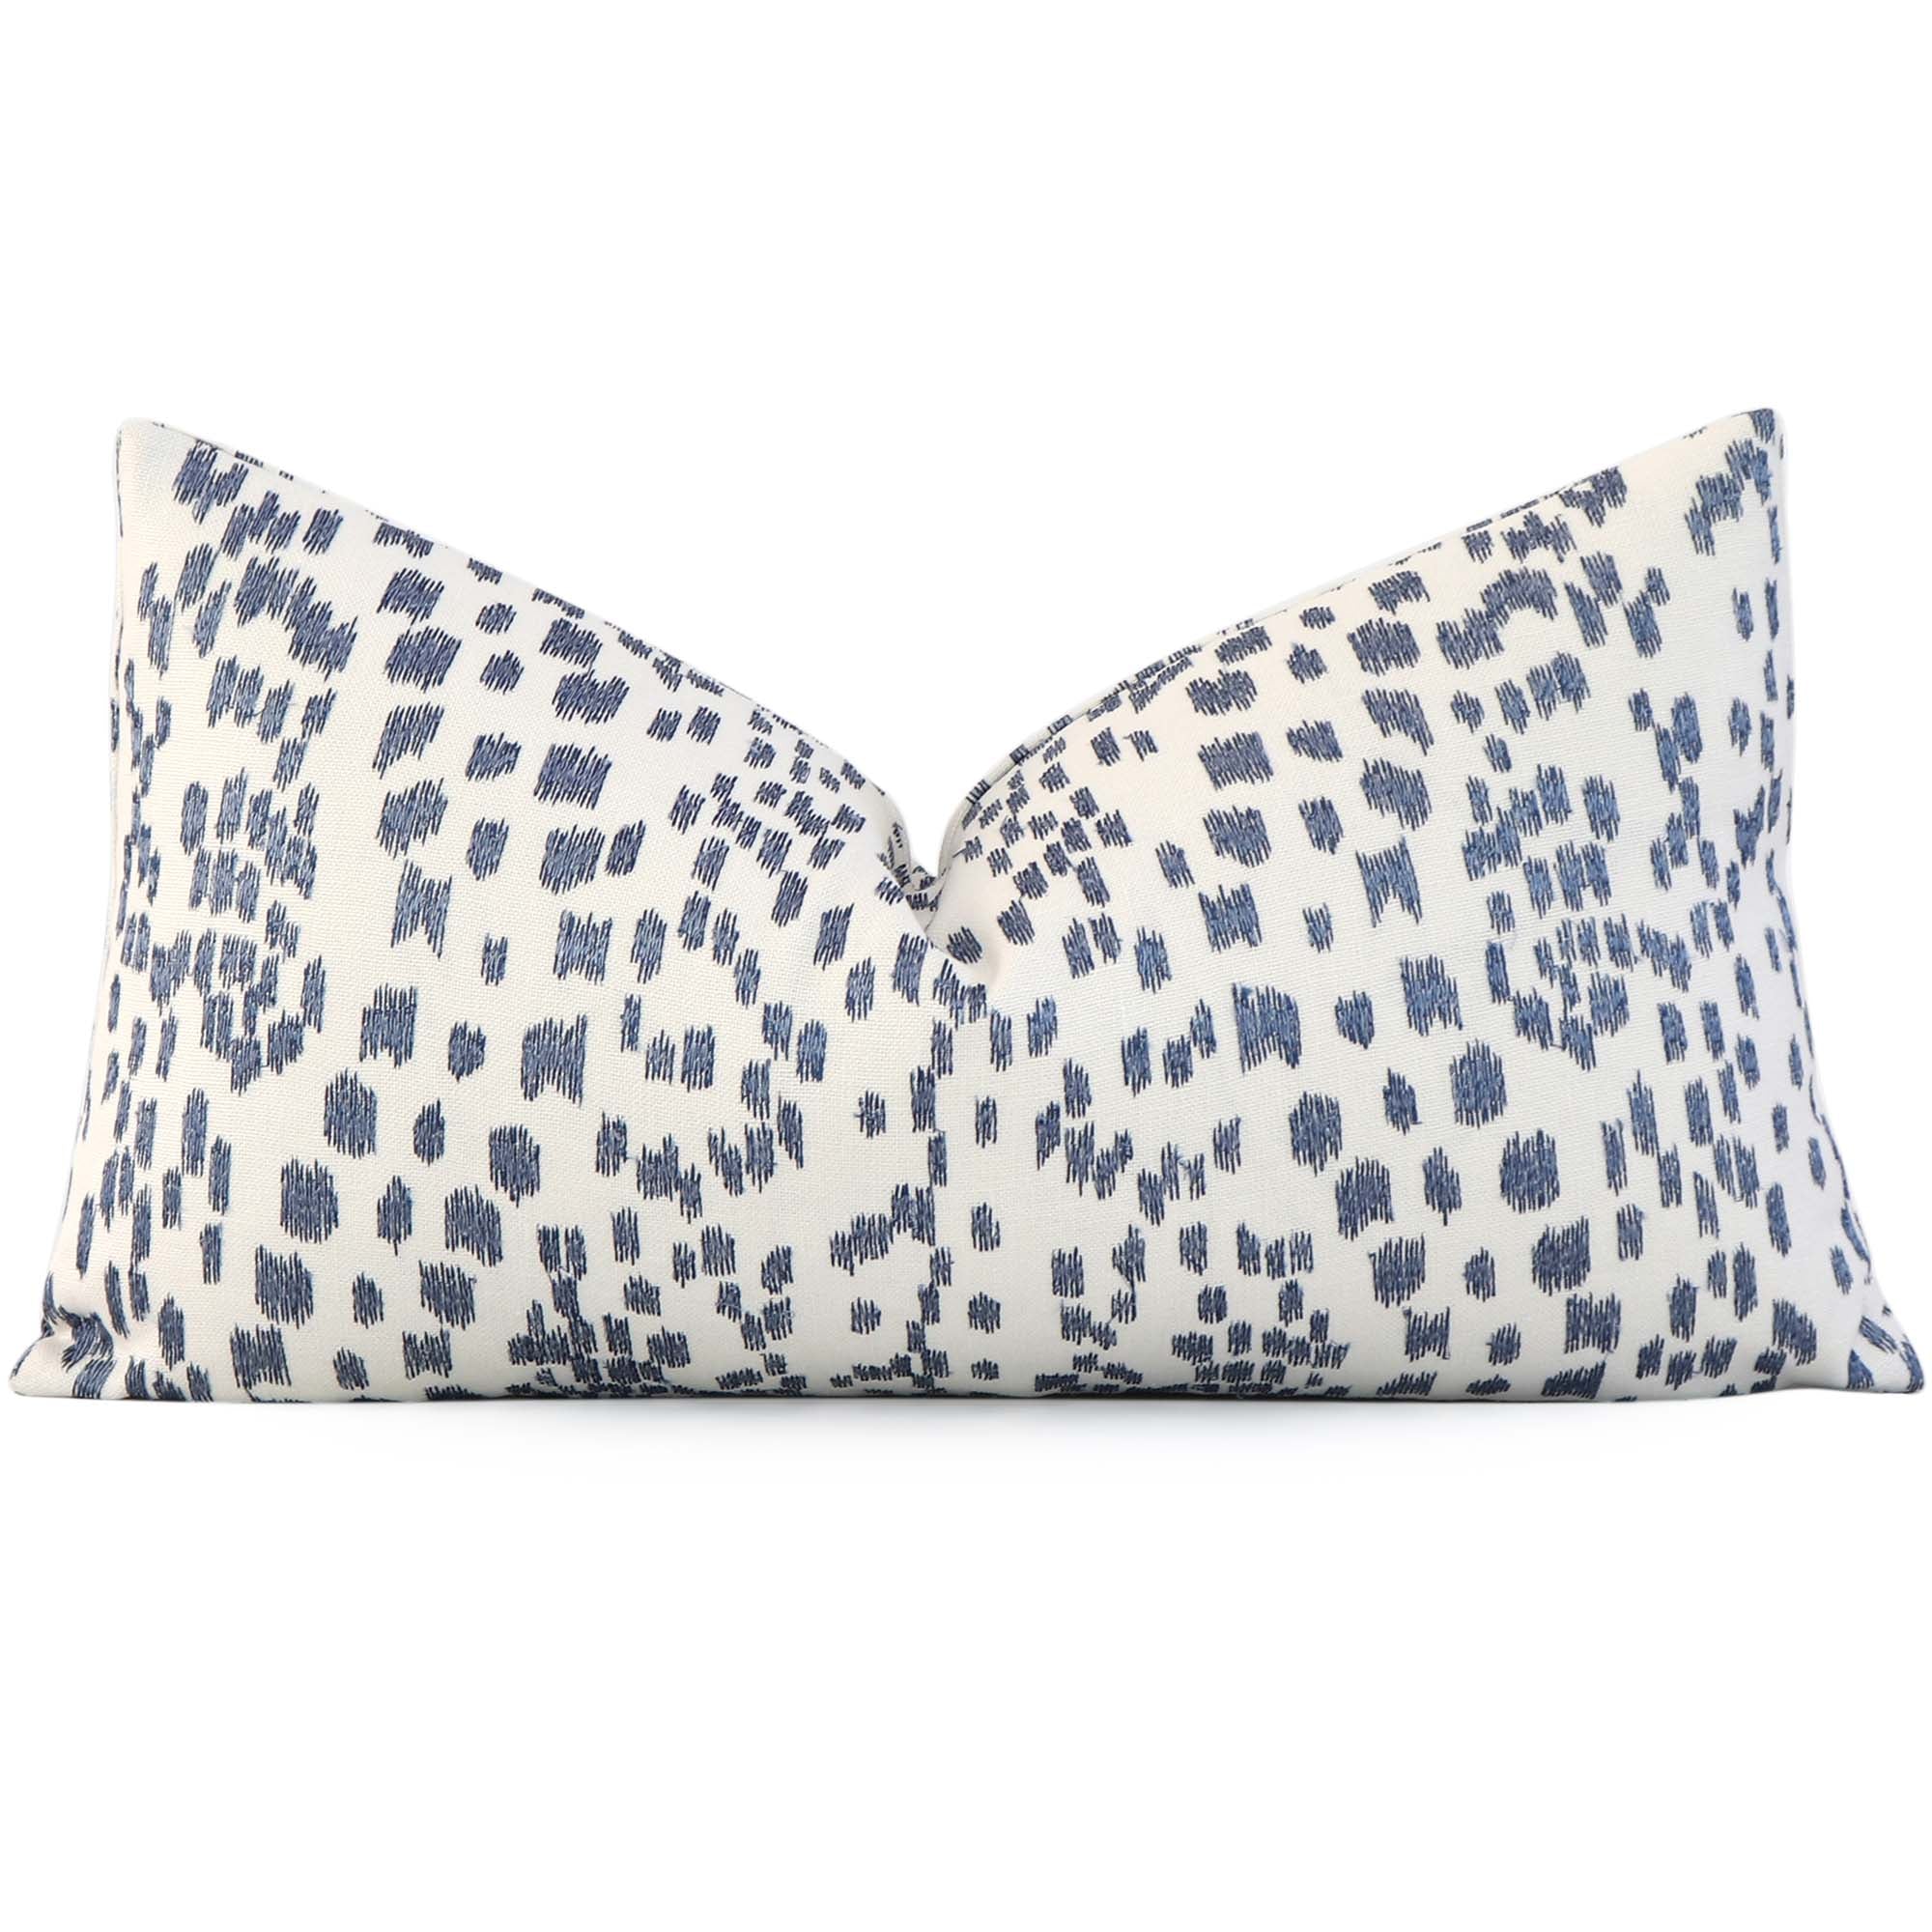 Brunschwig + Fils Les Touches Embroidered Canton Blue Designer Luxury Lumbar Throw Pillow Cover